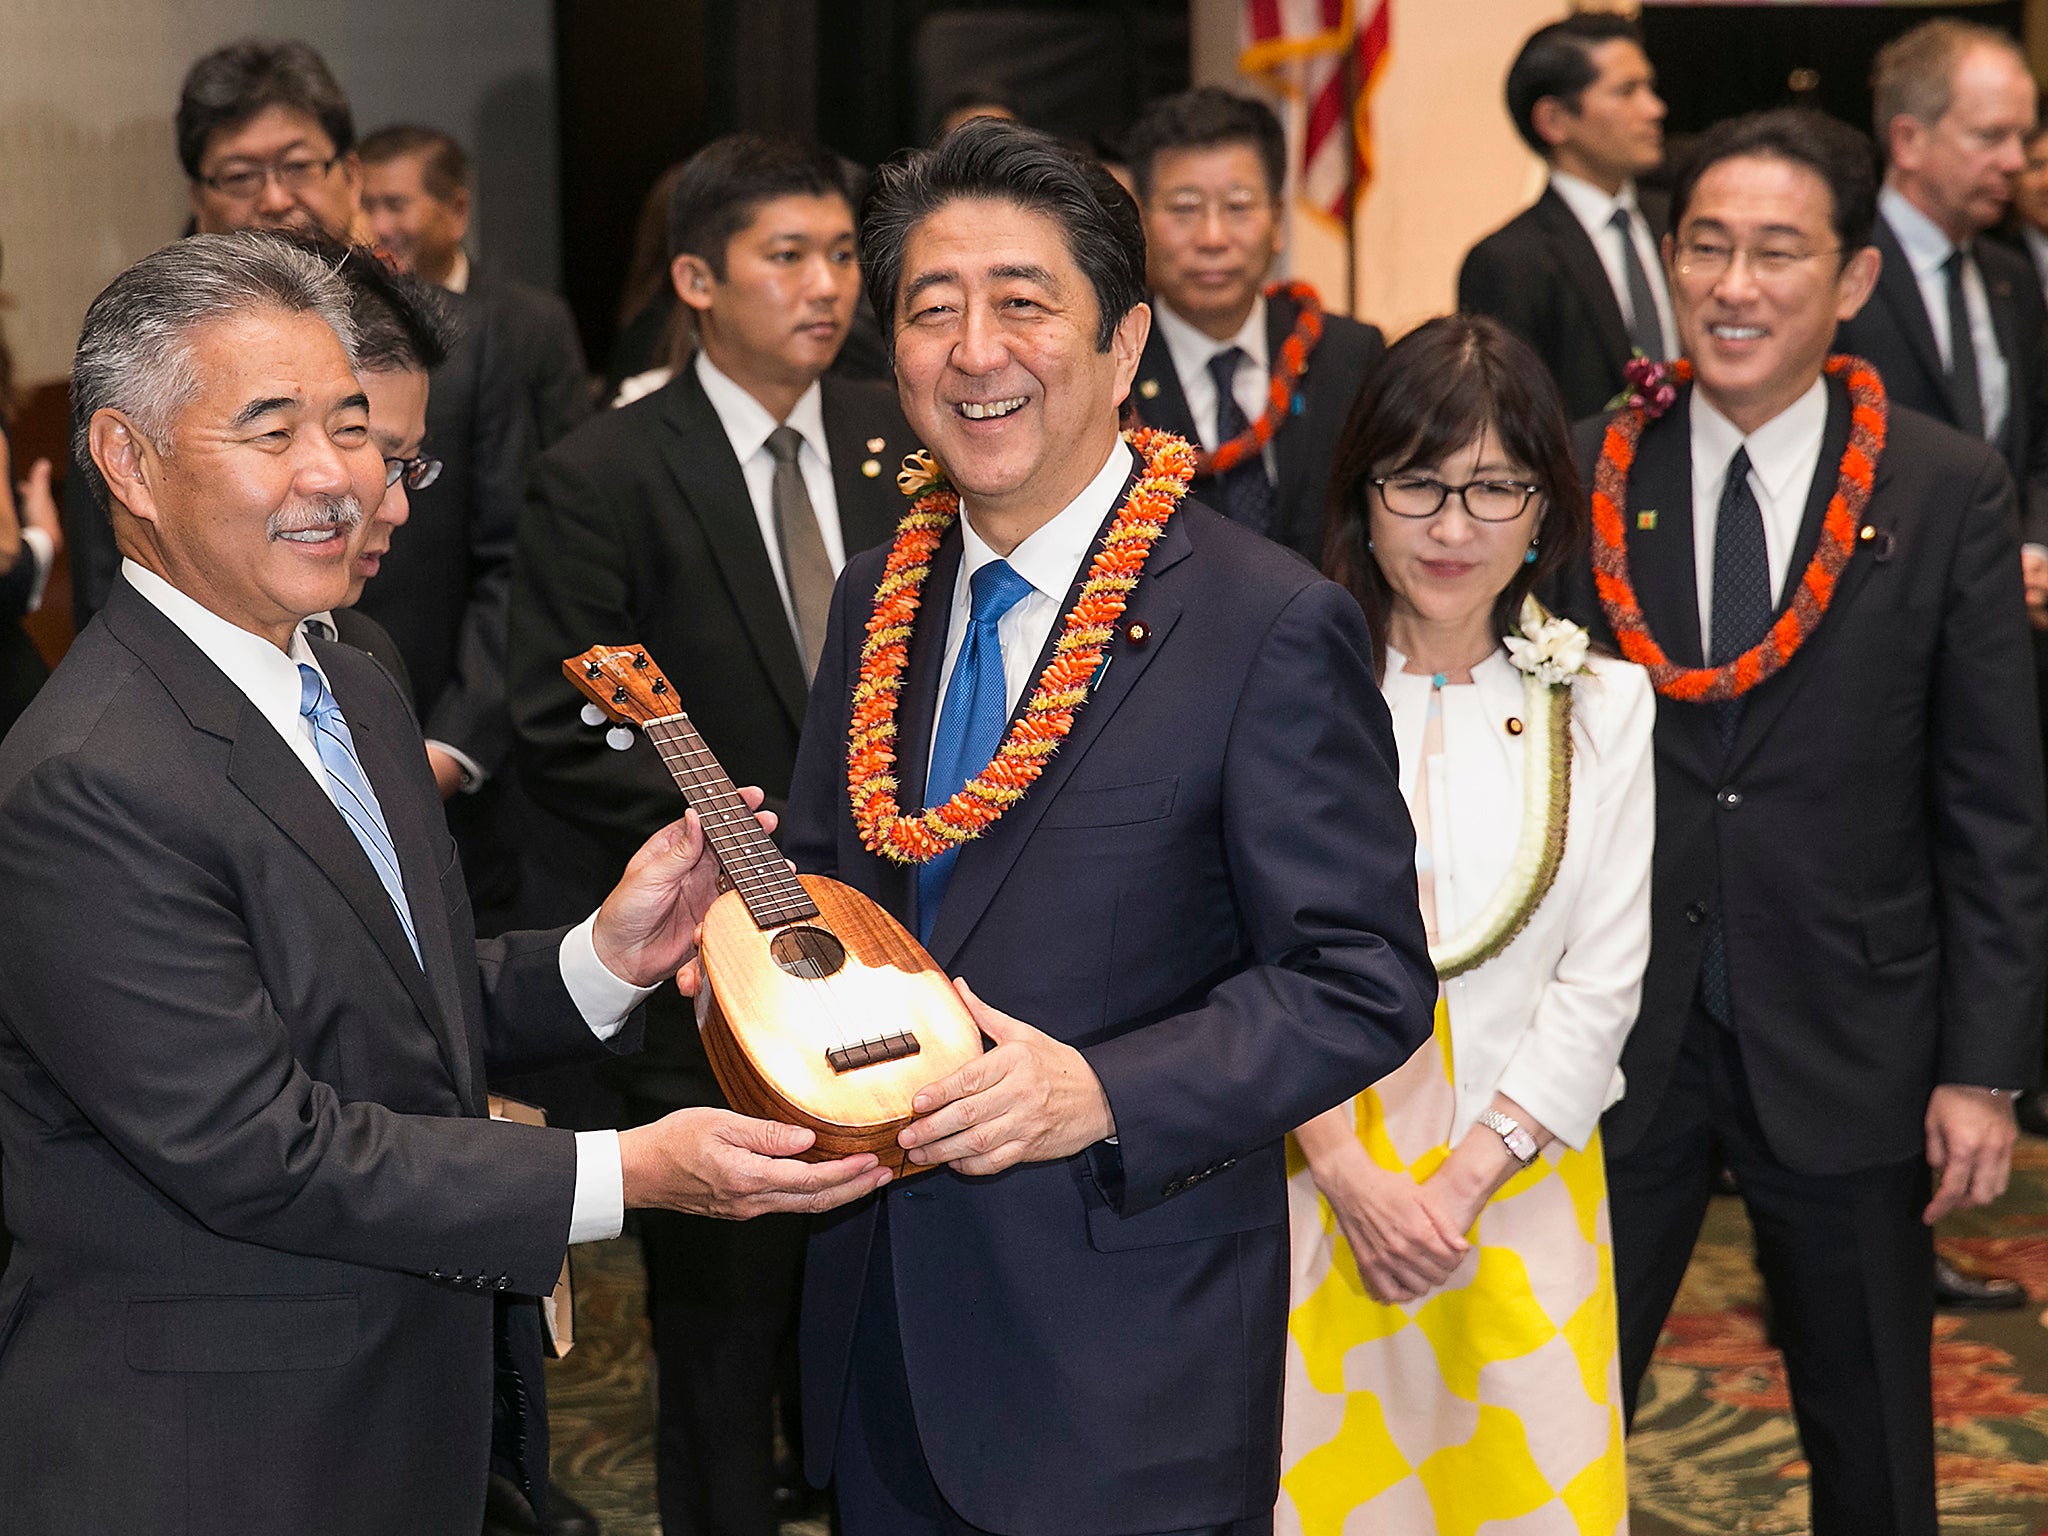 Hawaii Gov. David Ige, left, presents Japanese Prime Minister Shinzo Abe a pineapple-shaped ukulele at a dinner held in Abe's honour in Honolulu, Hawaii